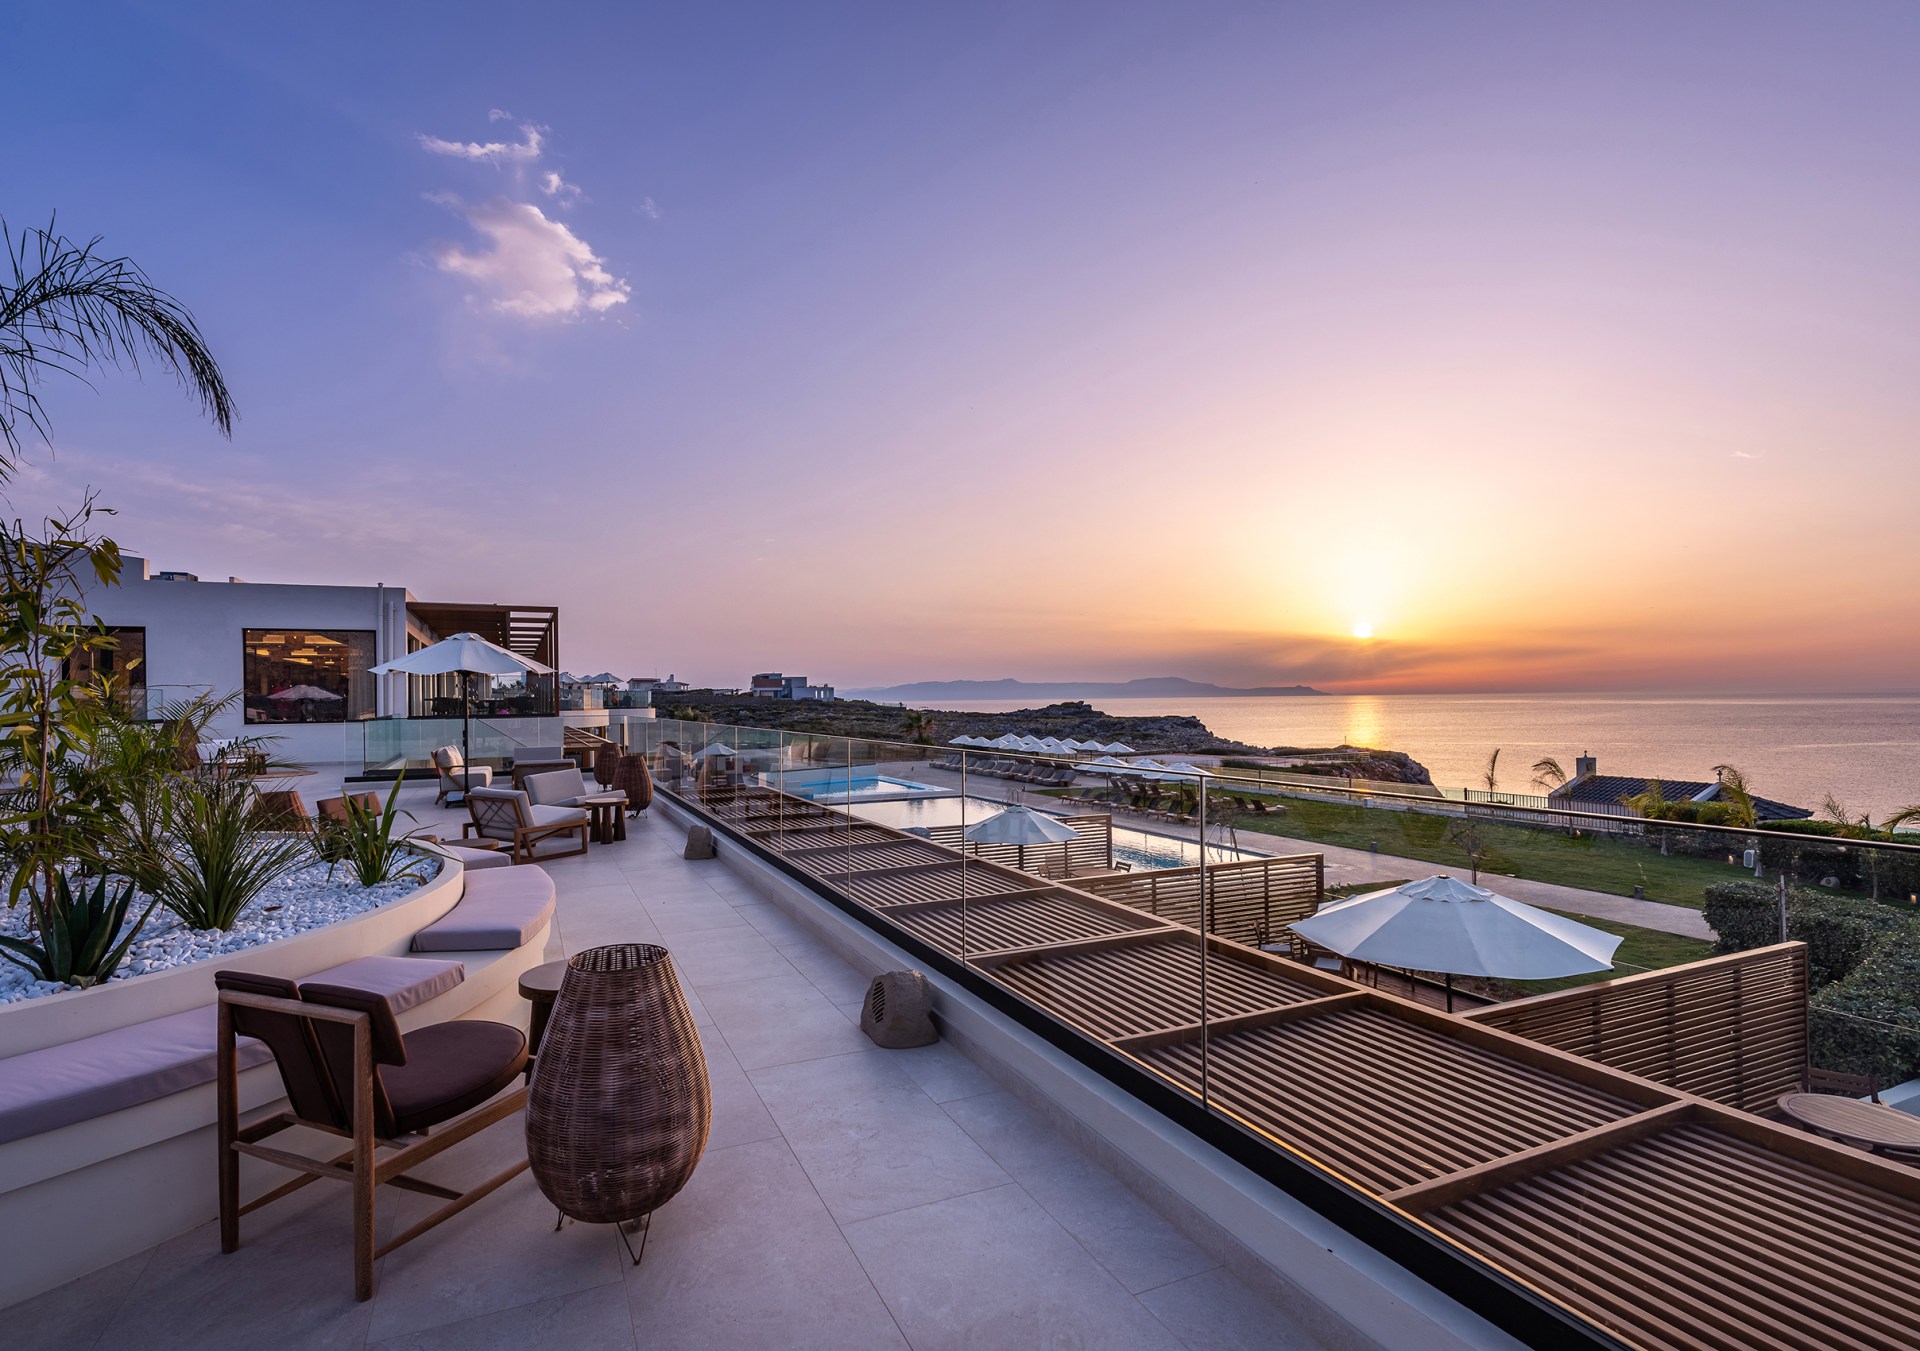 Isla Brown Chania Crete Resort, Curio Collection by Hilton - Sunset View